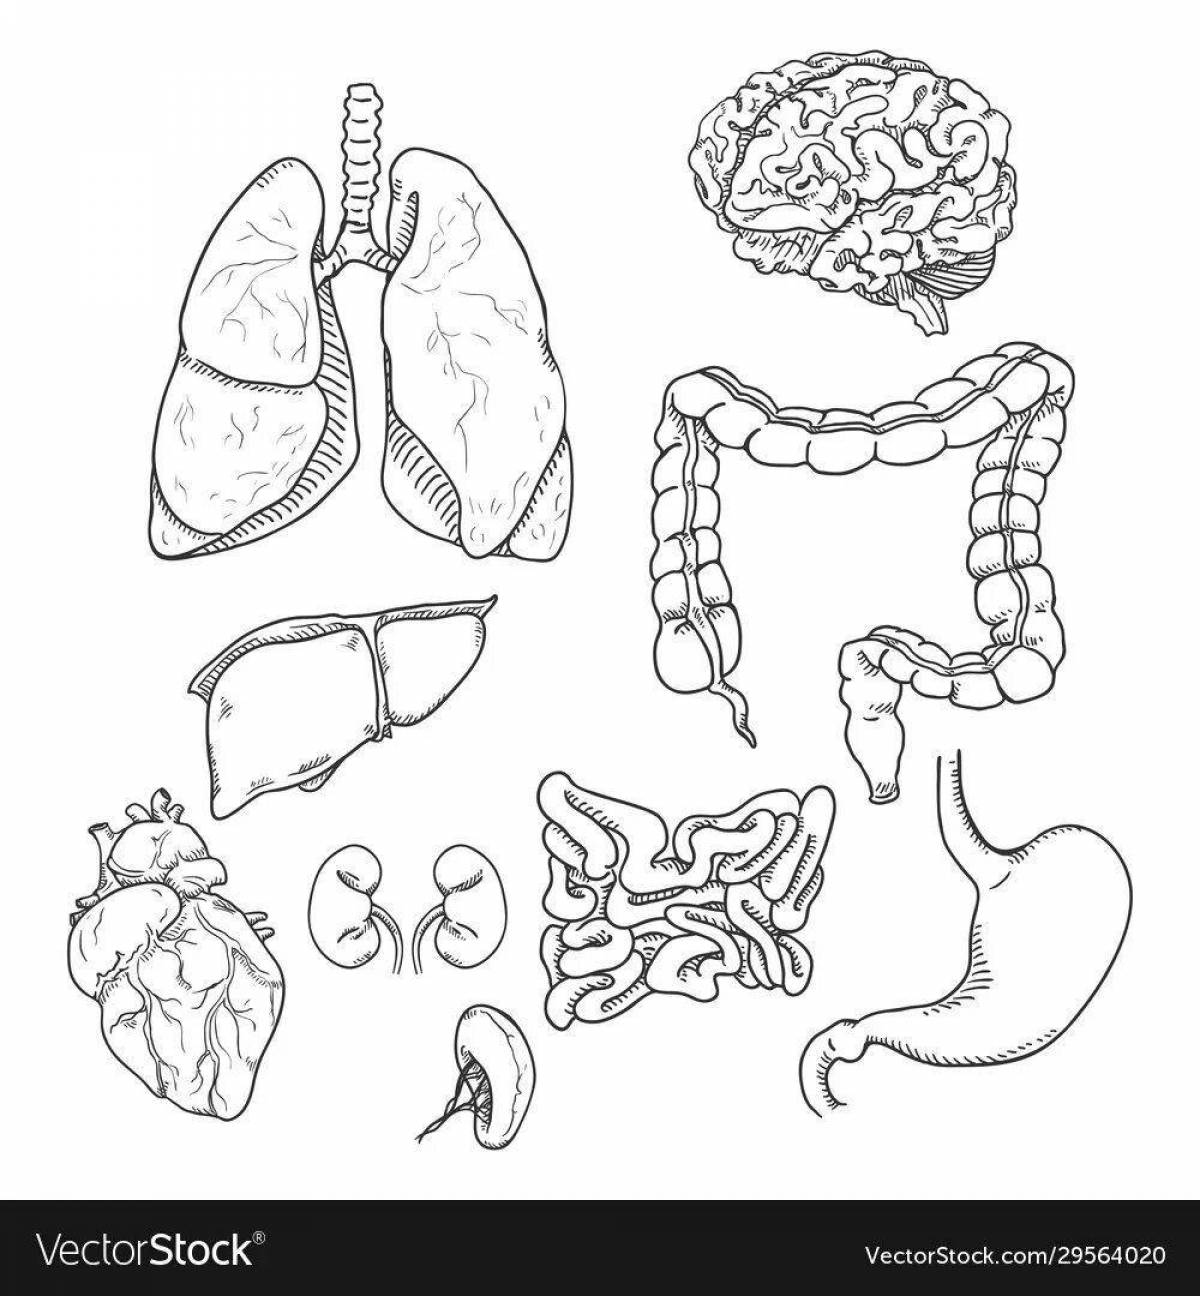 Inspiring coloring book of the human body with internal organs